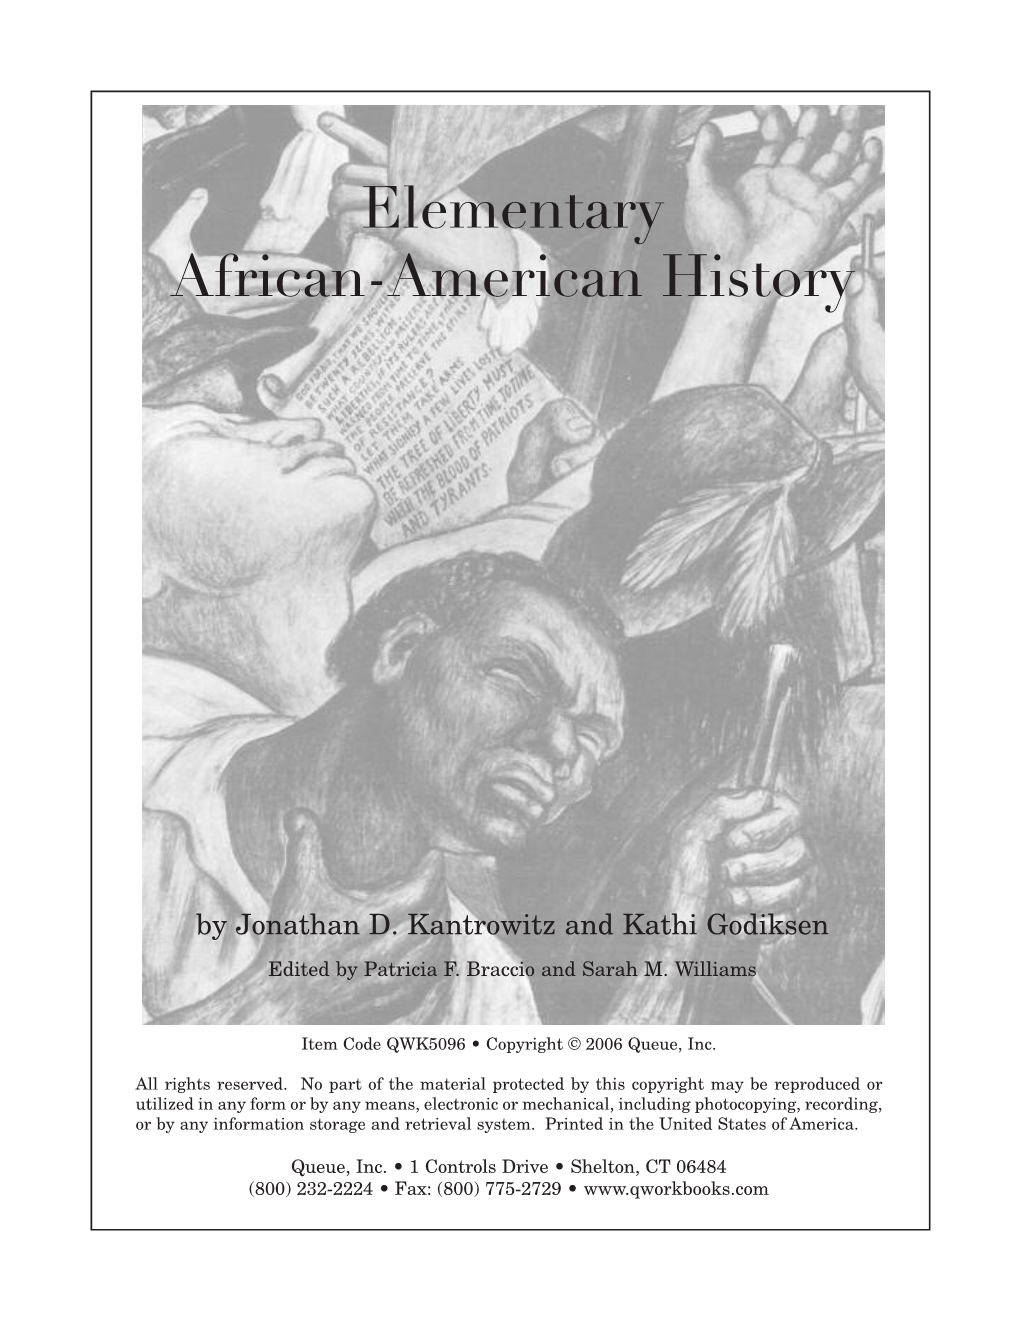 Elementary African-American History